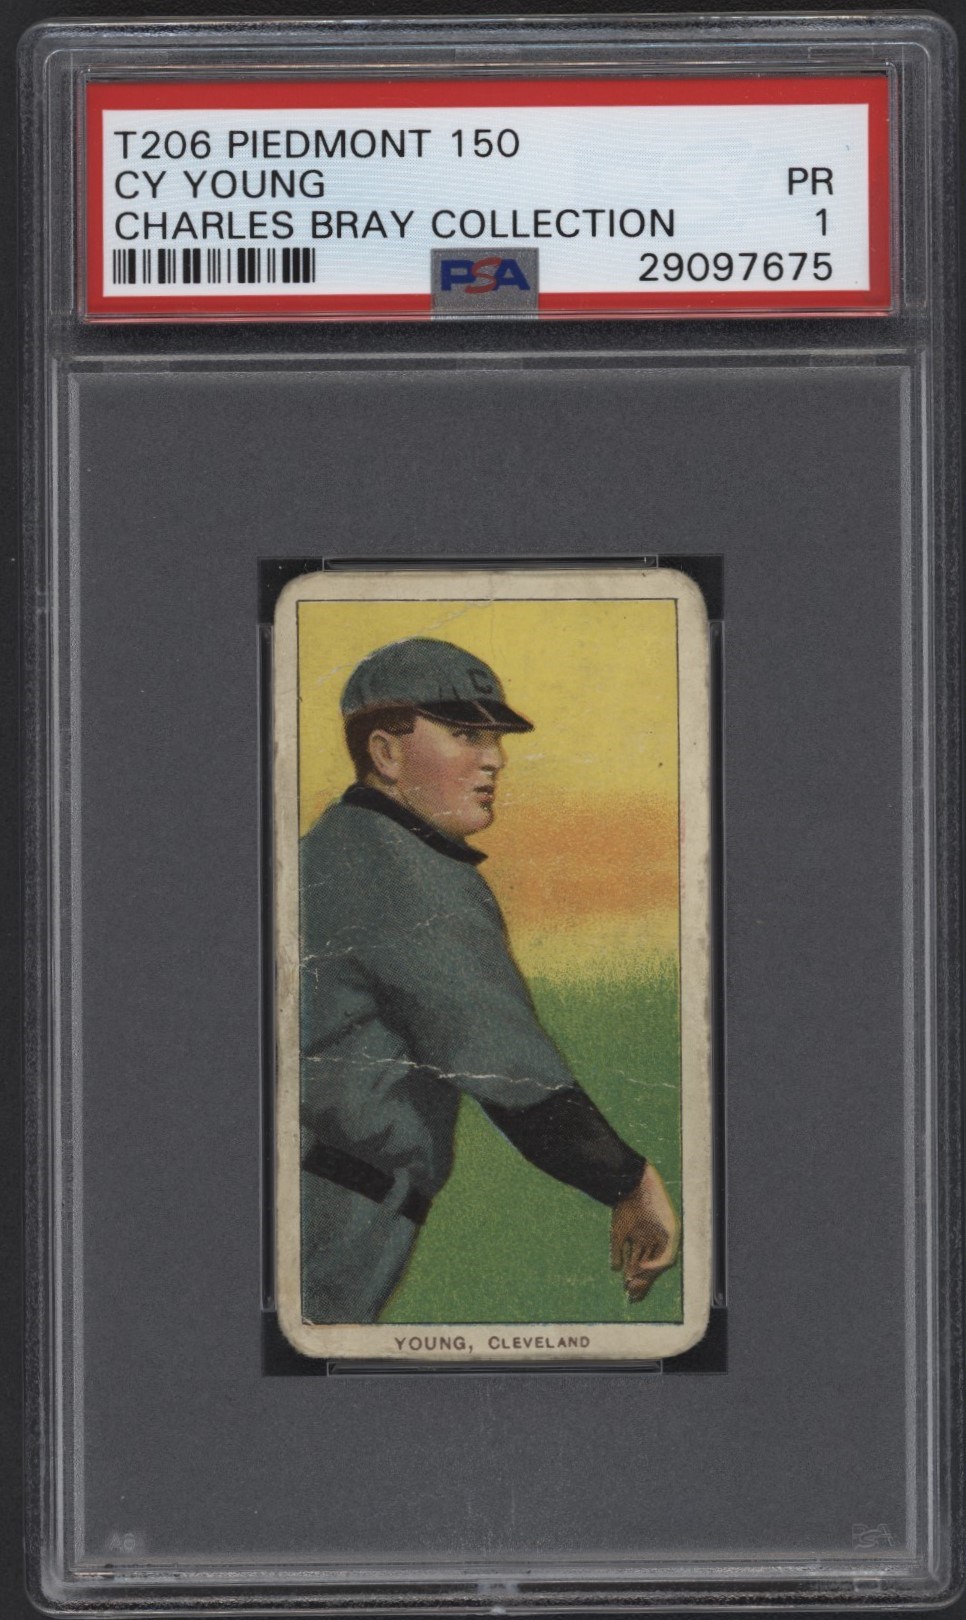 Baseball and Trading Cards - T206 Piedmont Cy Young Bare Hand PSA 1 From the Charles Bray Collection.